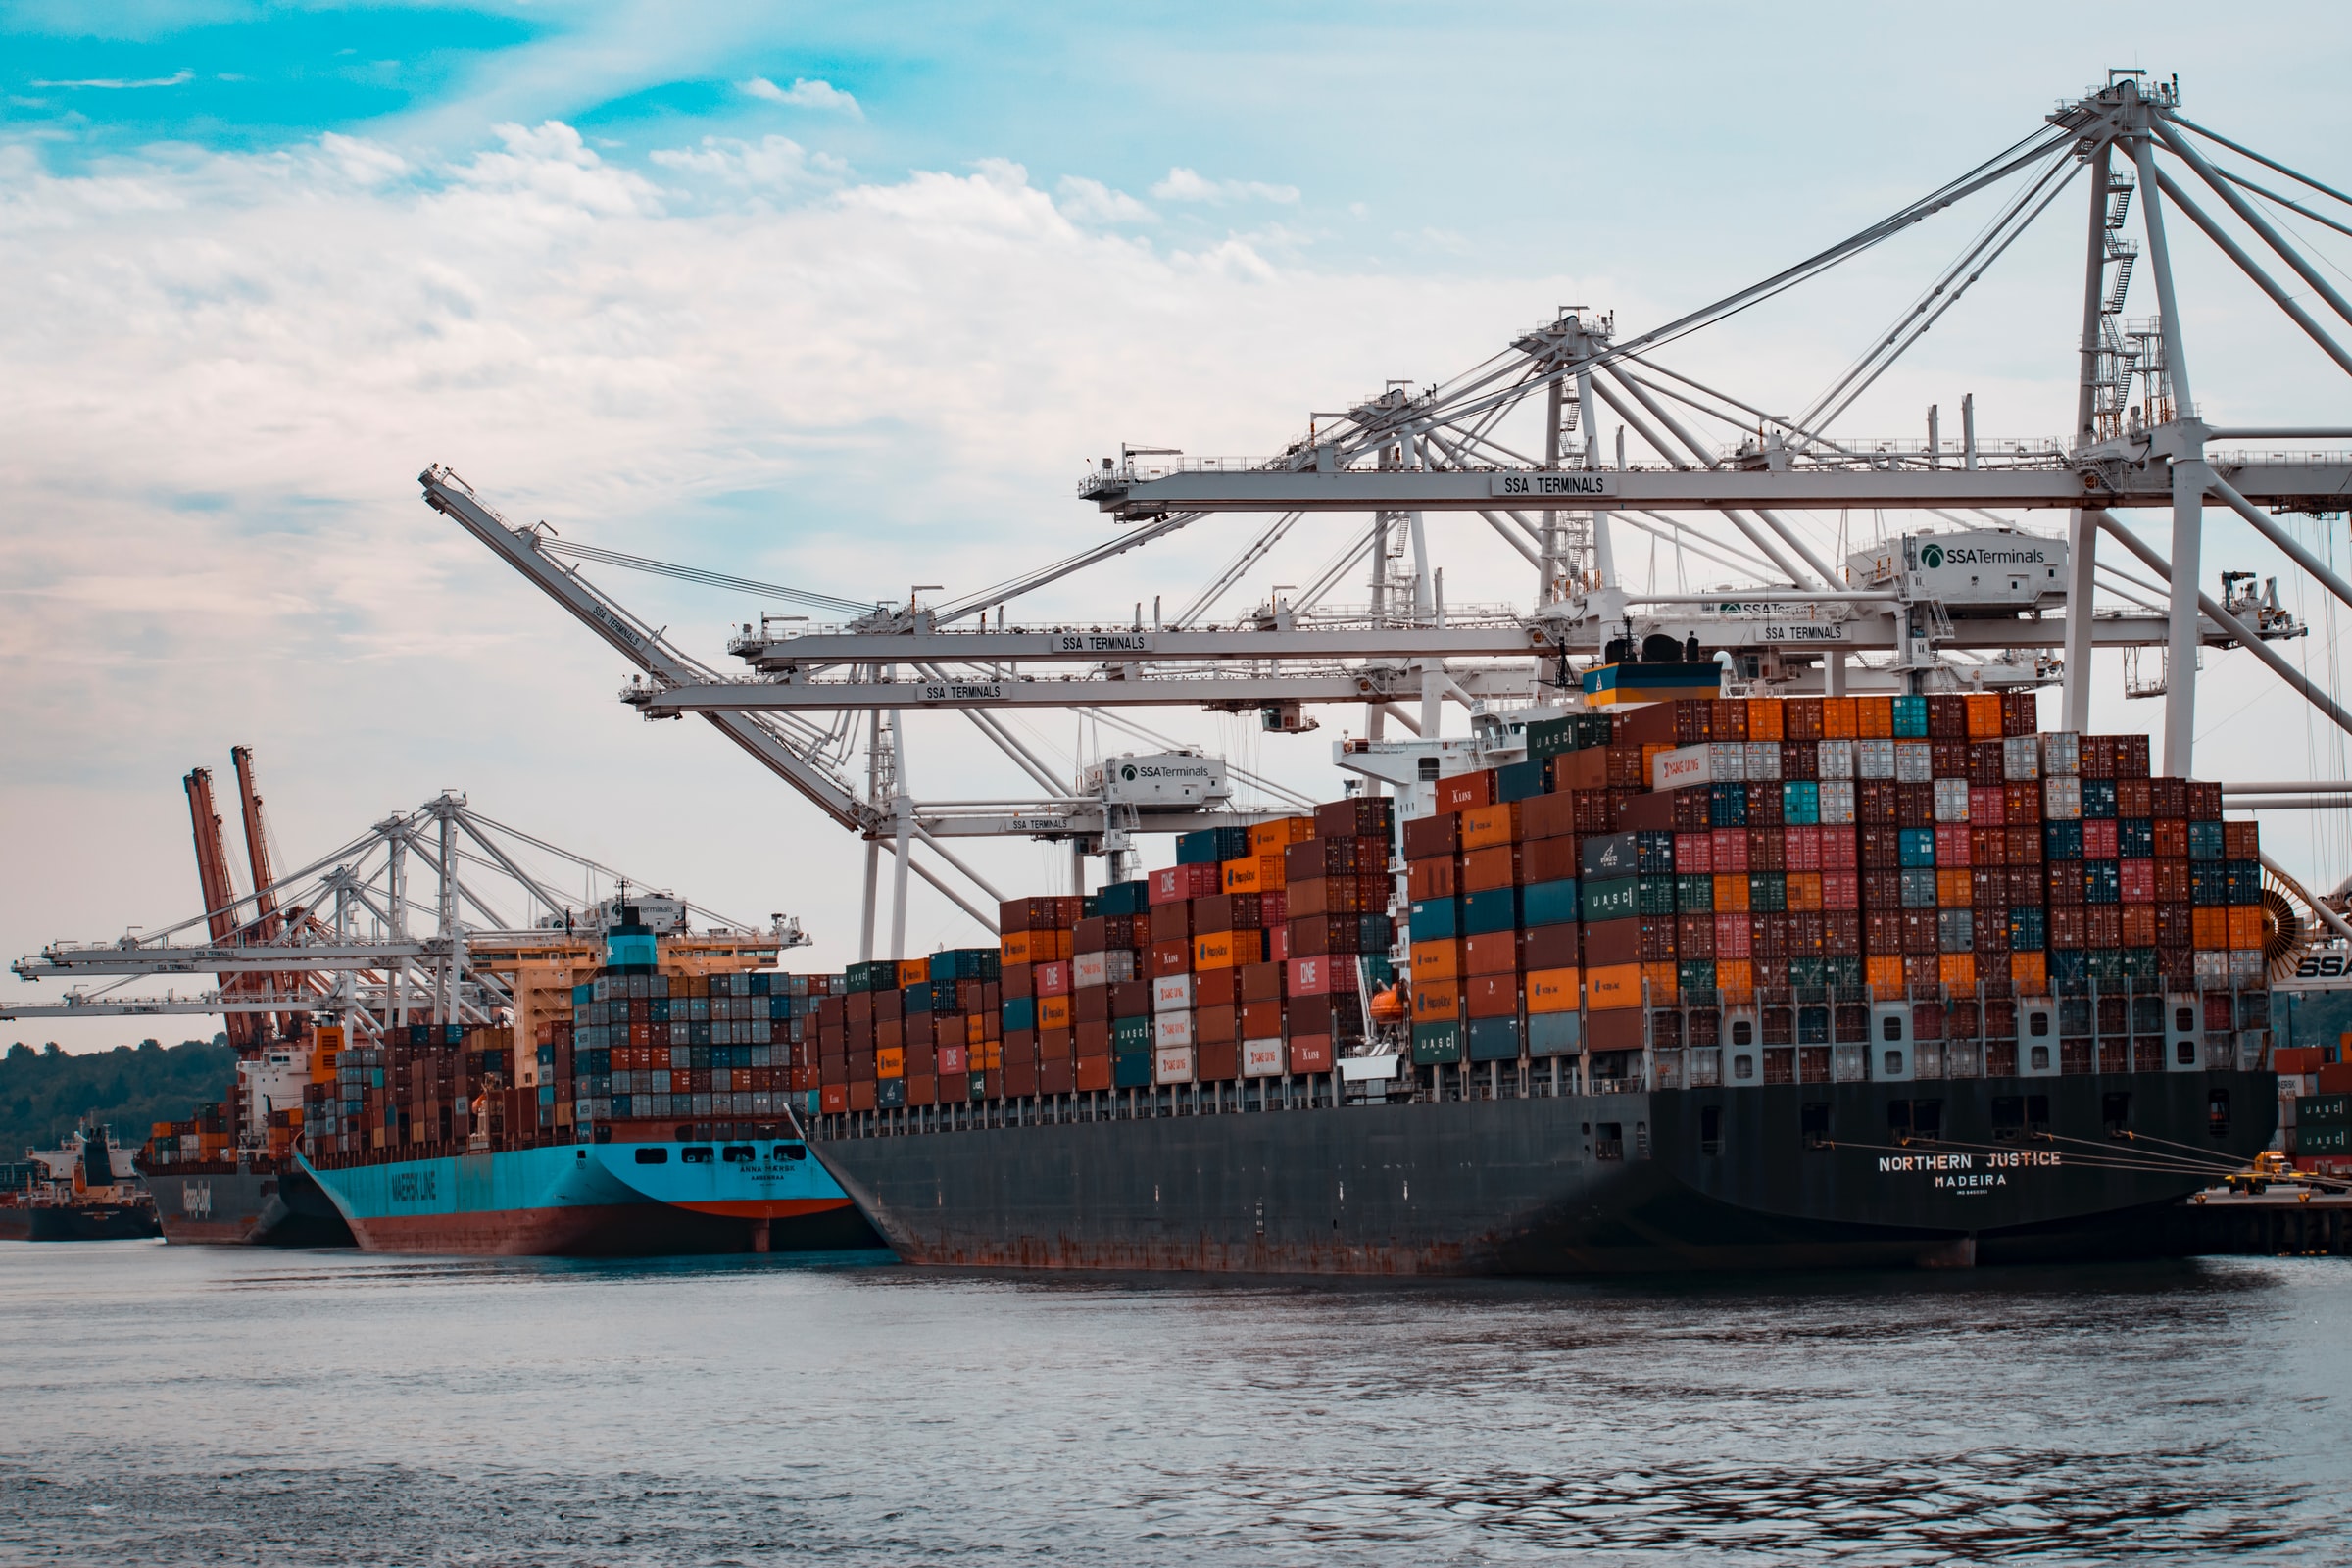 International shipping doc with cargo ships for a globalized supply chain